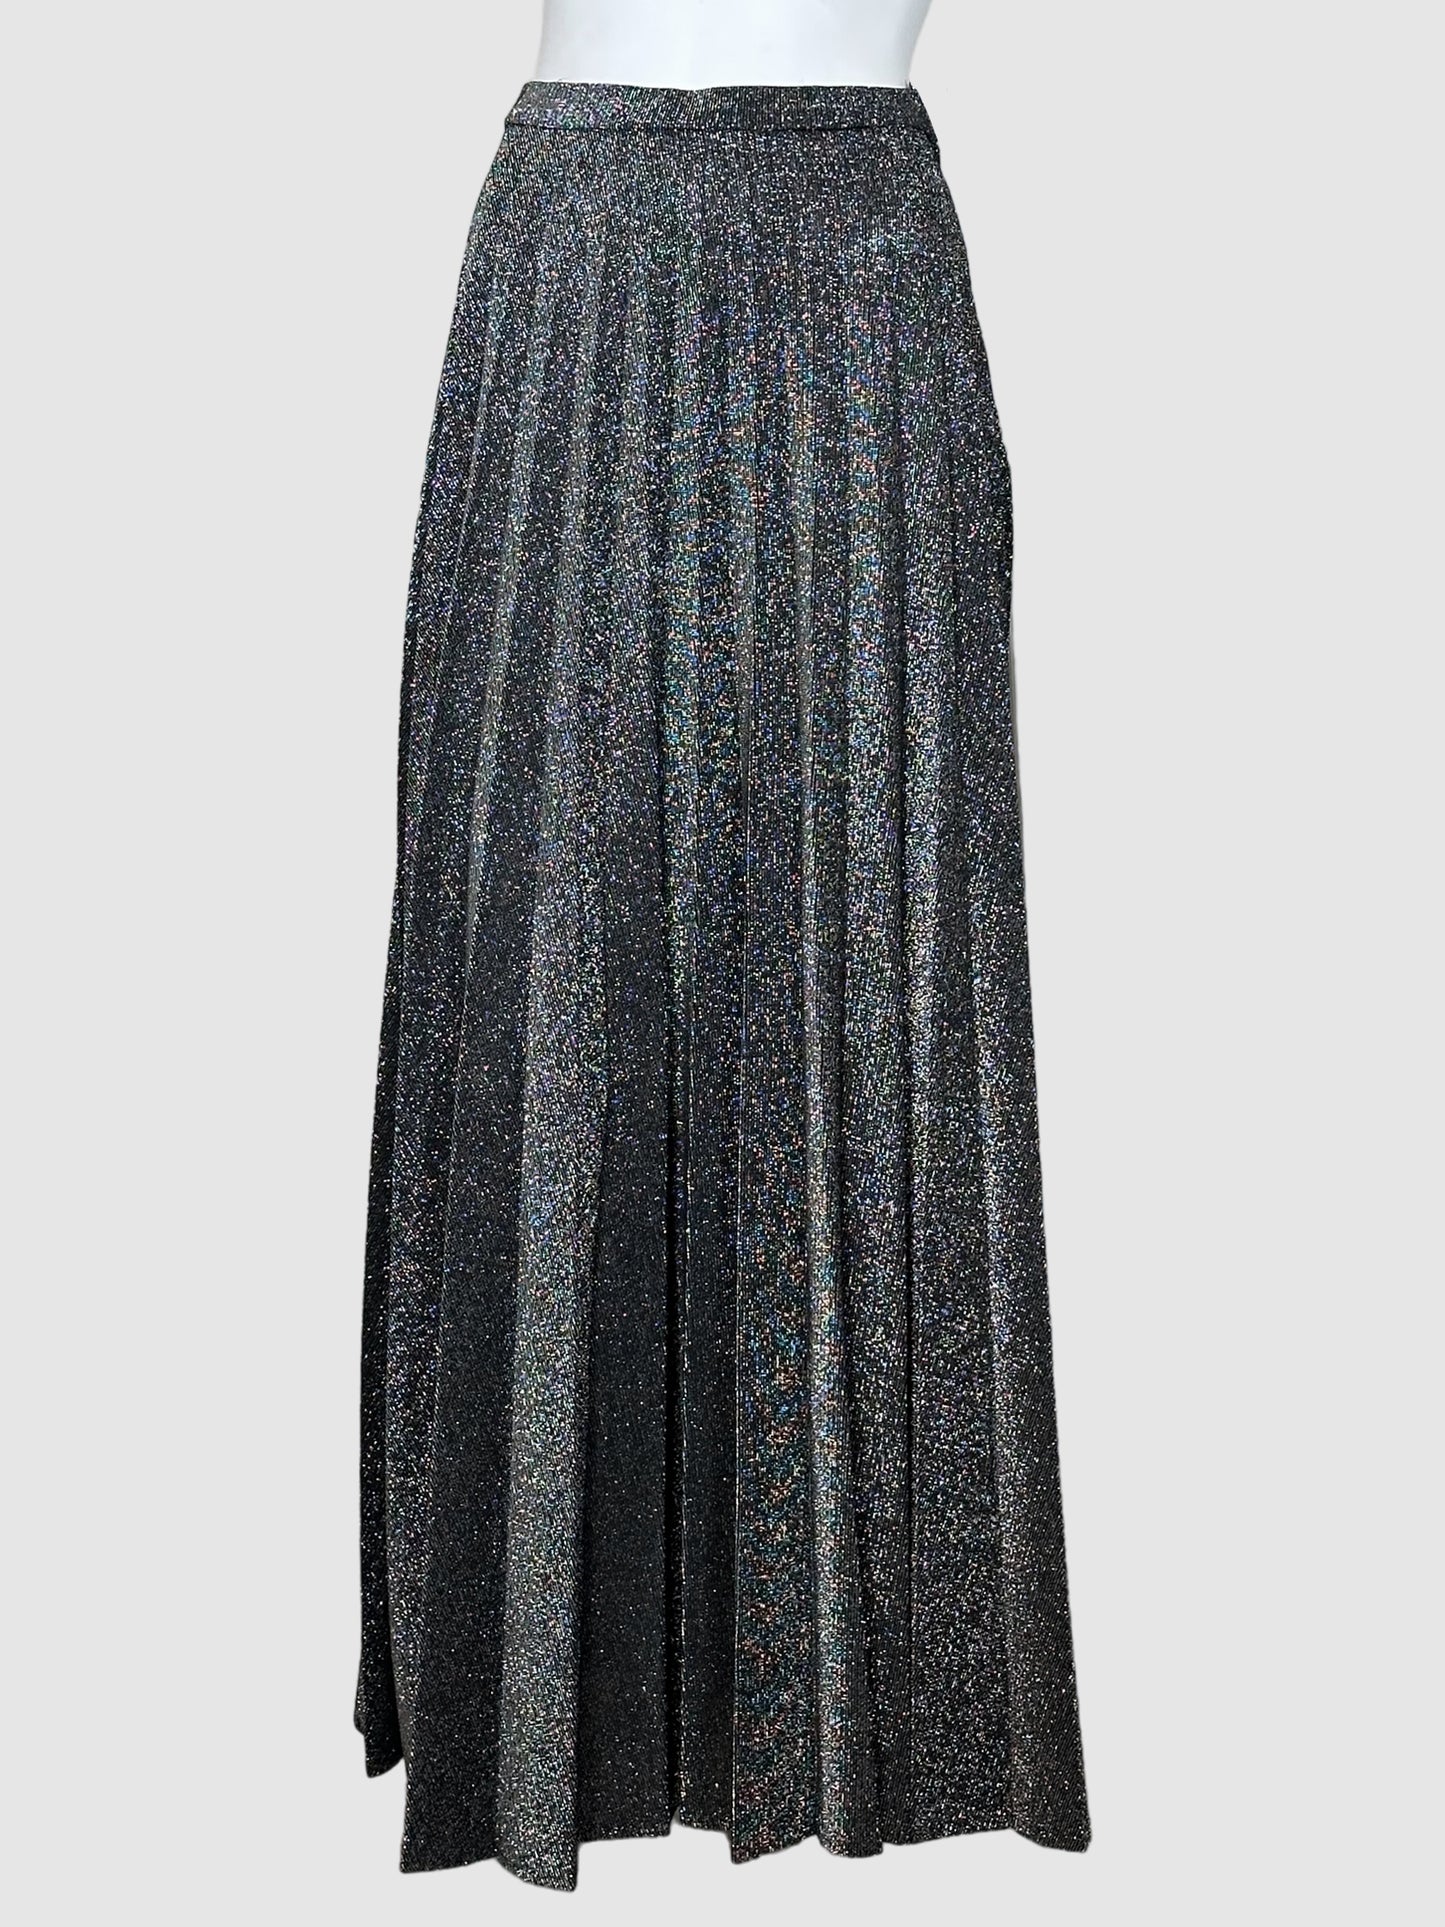 Toplet Lurex Pleated Maxi Skirt - Size XS